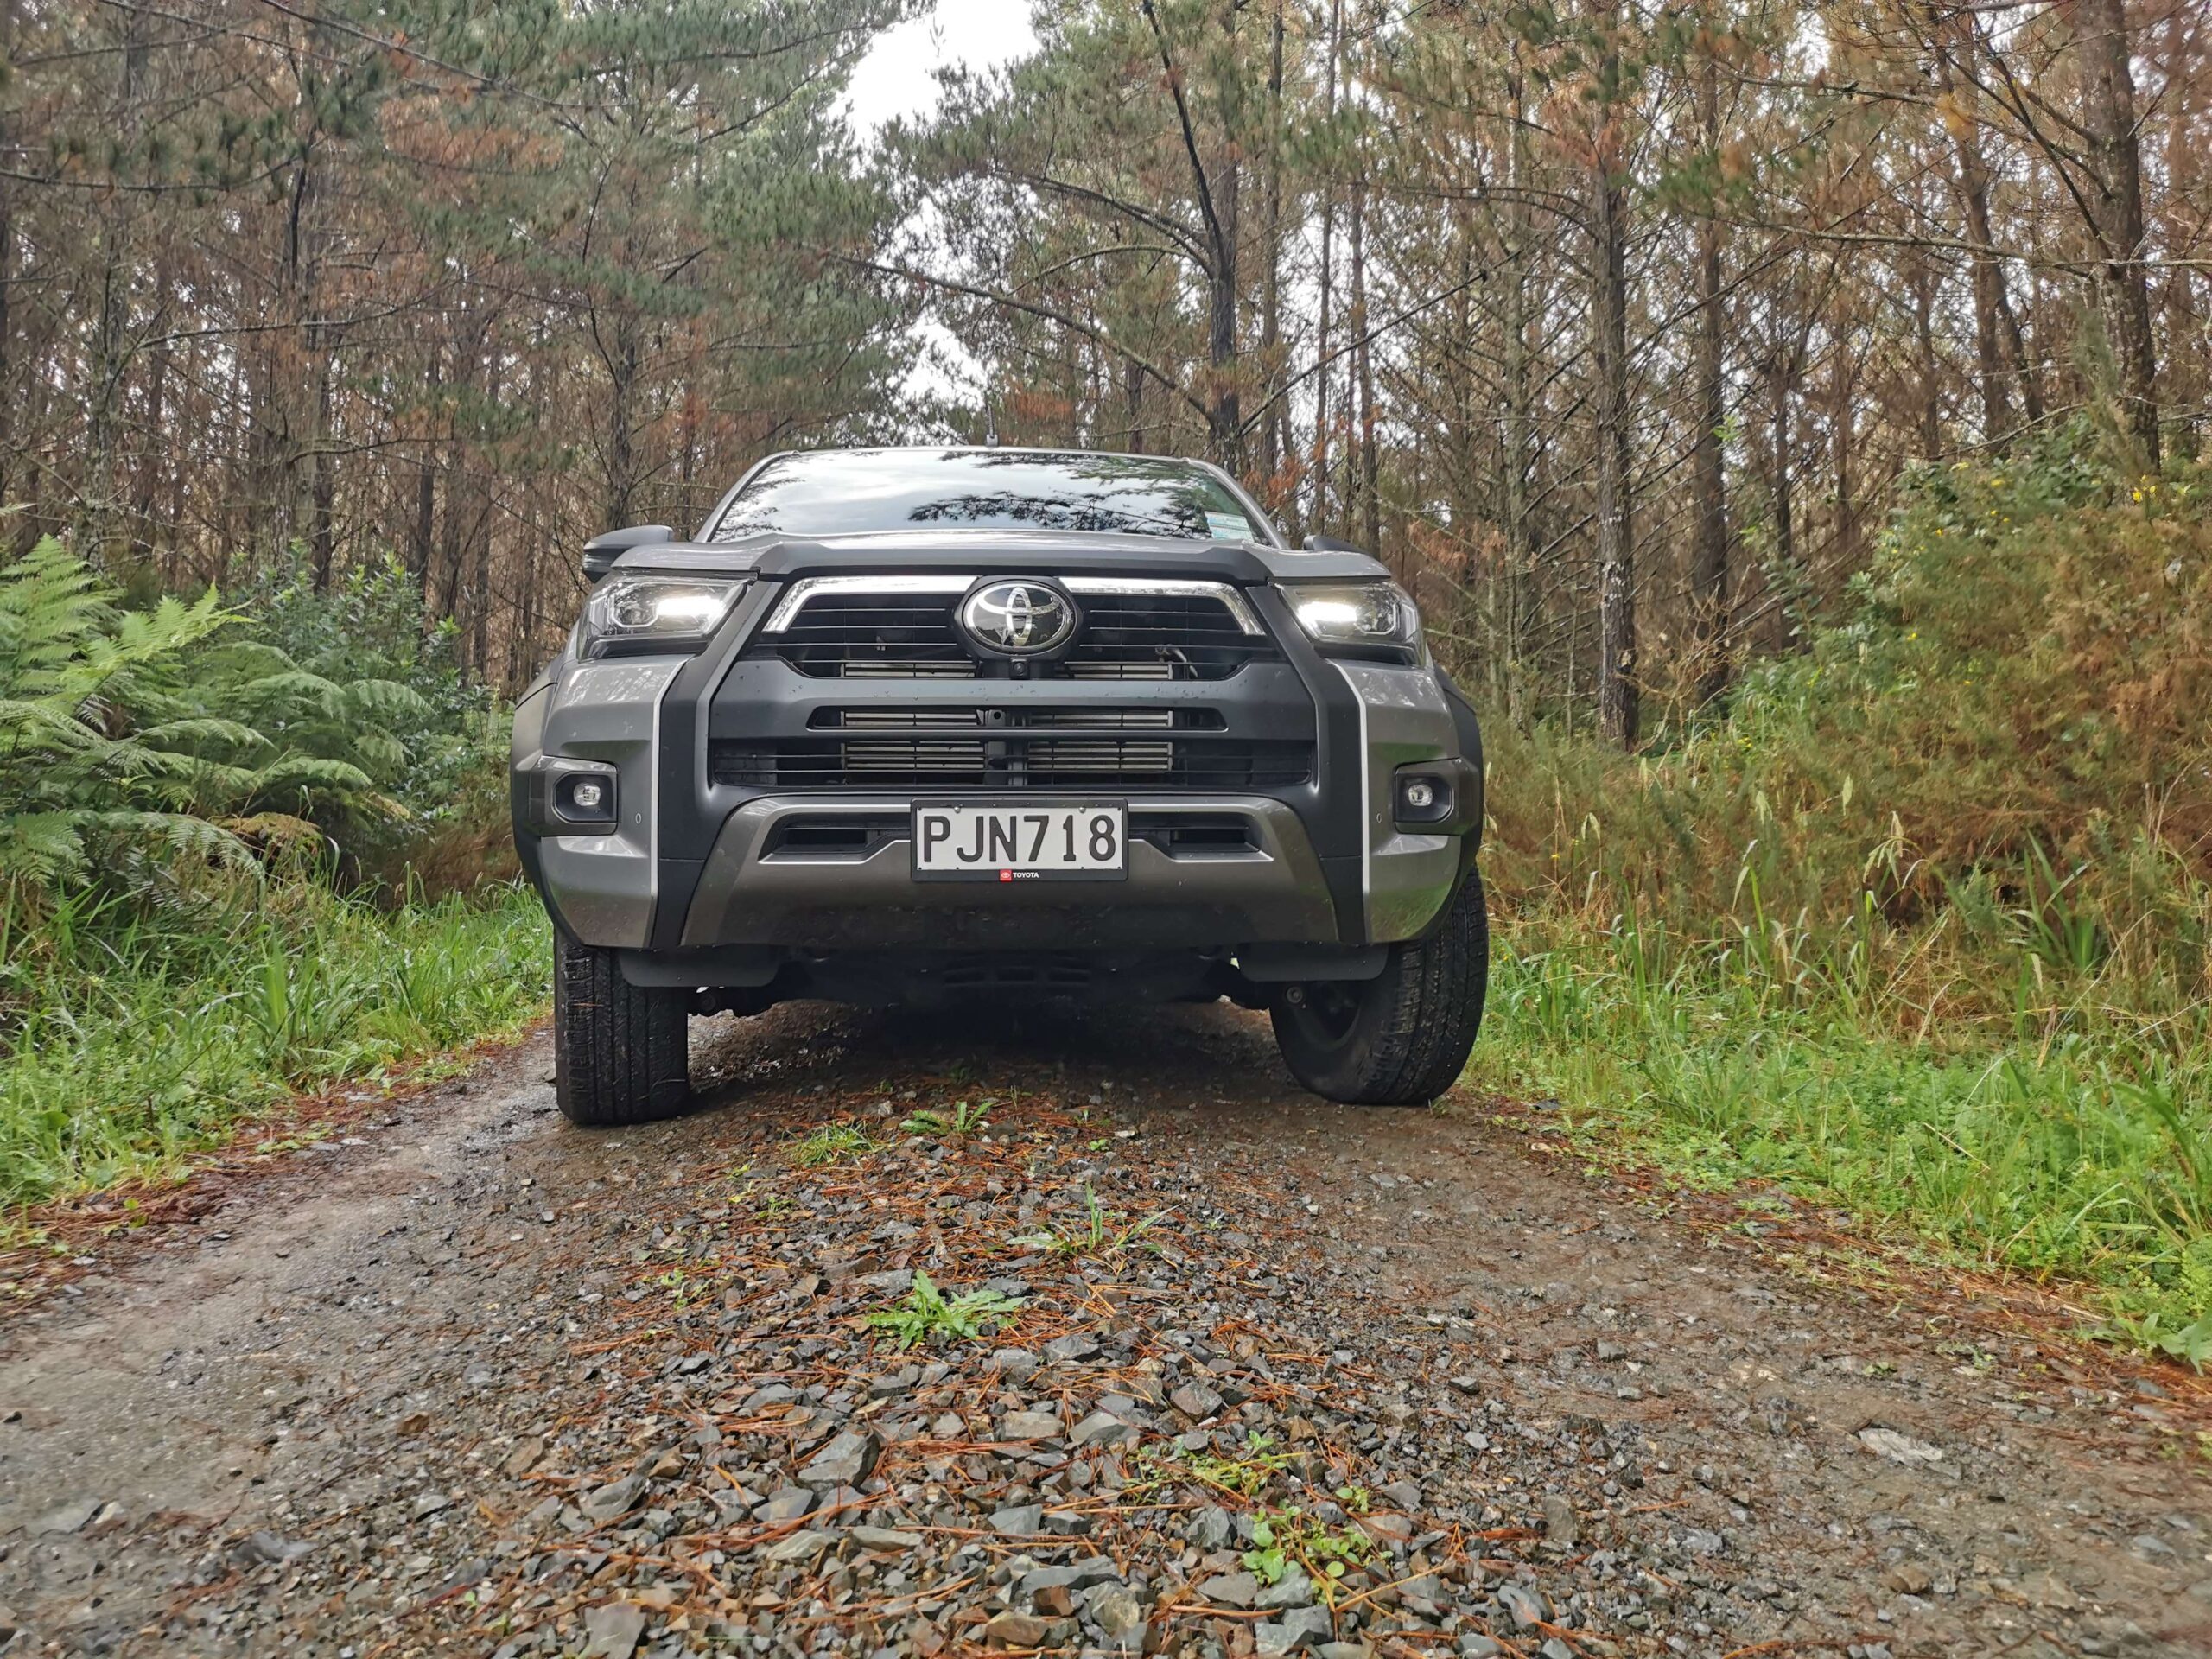 Toyota Hilux 4WD SR5 Cruiser Wide Track review NZ